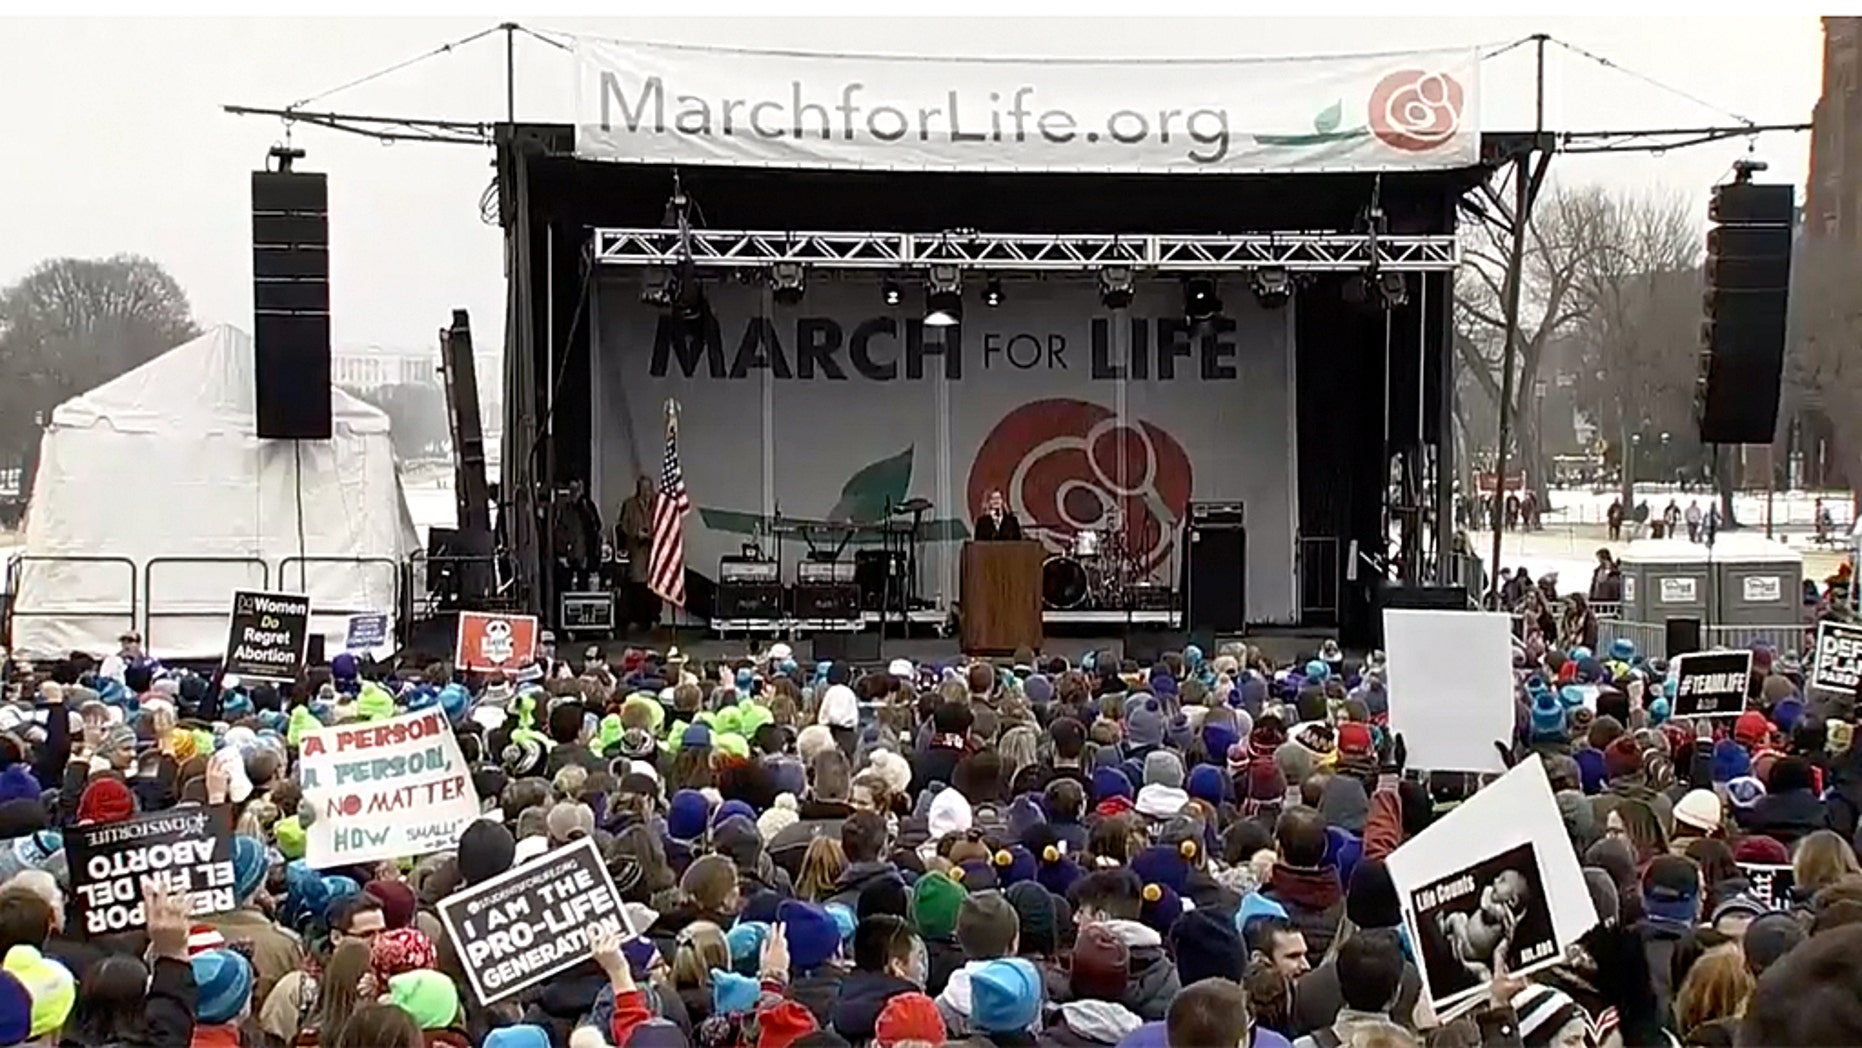 The March for Life goes on, the fight is worth it Fox News